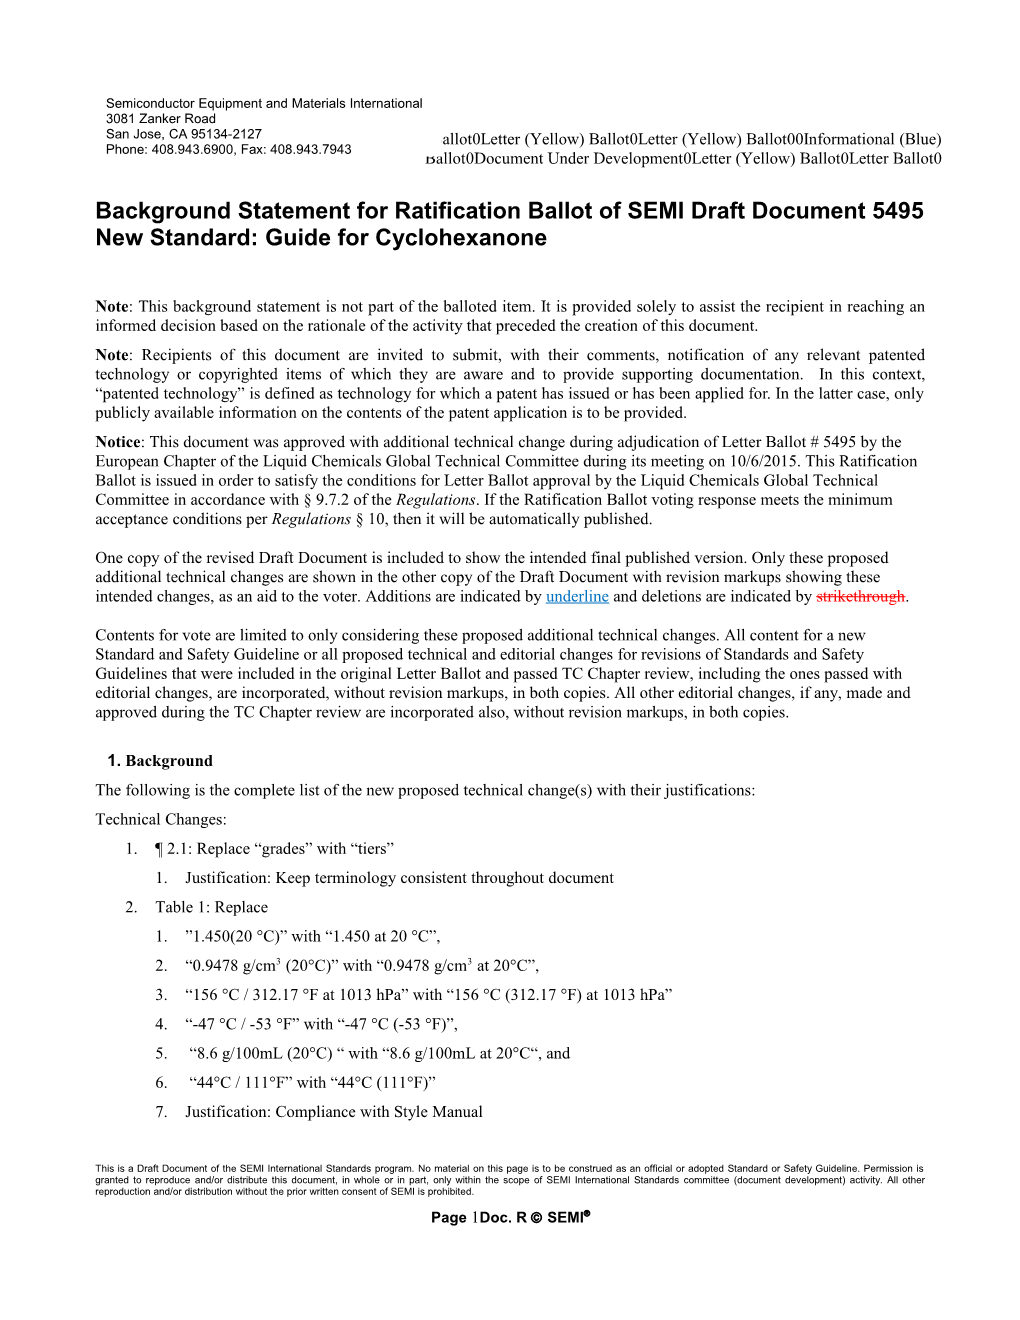 Background Statement for Ratification Ballot of SEMI Draft Document 5495